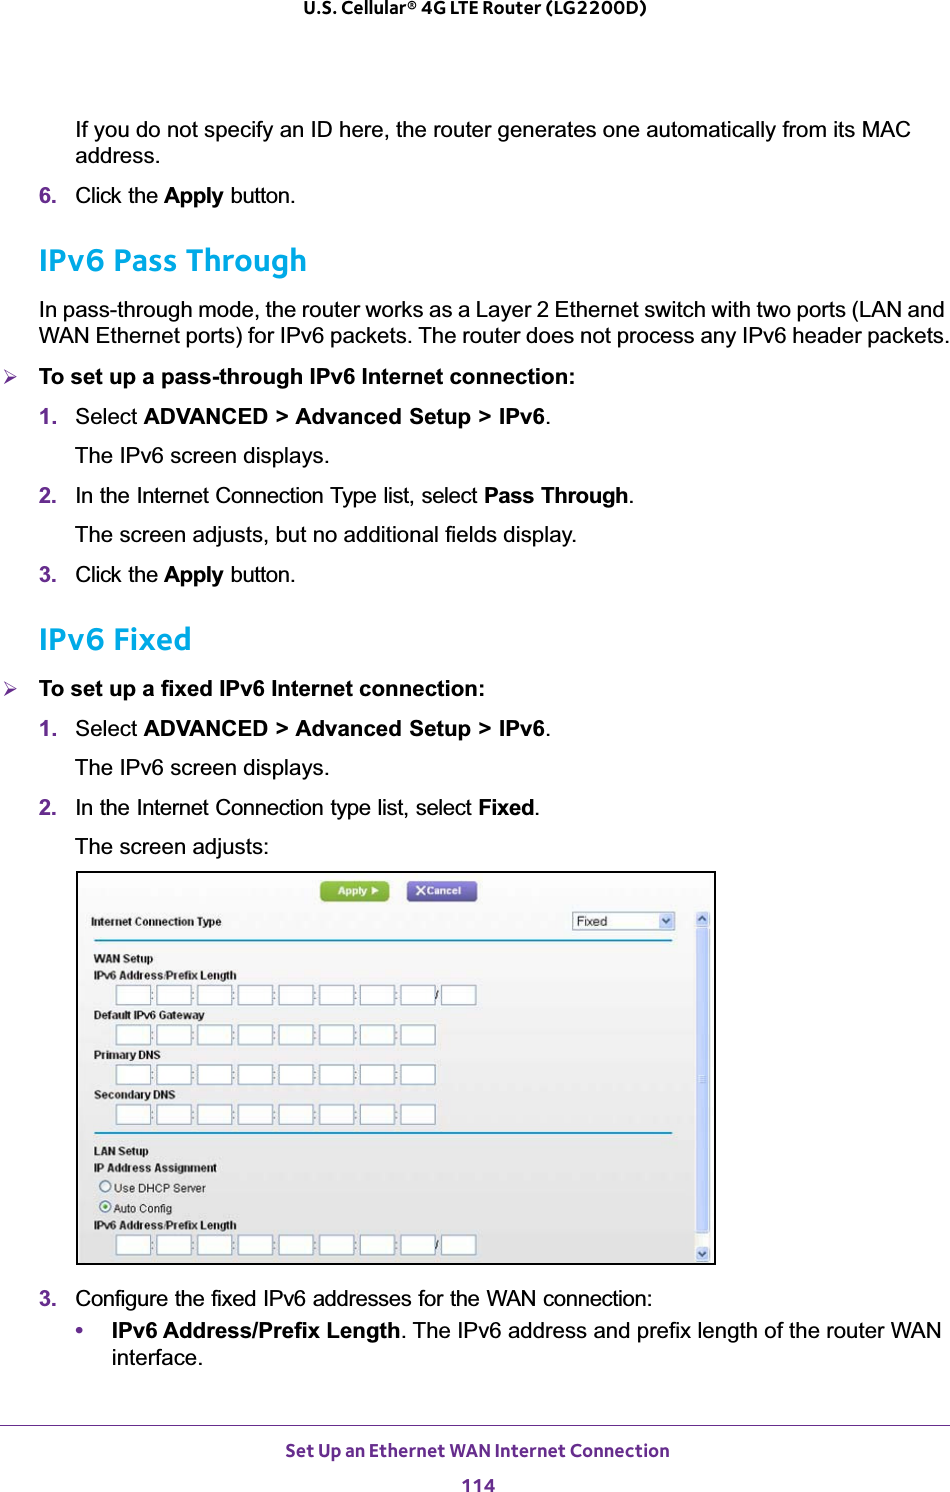 Set Up an Ethernet WAN Internet Connection114U.S. Cellular® 4G LTE Router (LG2200D) If you do not specify an ID here, the router generates one automatically from its MAC address.6. Click the Apply button.IPv6 Pass ThroughIn pass-through mode, the router works as a Layer 2 Ethernet switch with two ports (LAN and WAN Ethernet ports) for IPv6 packets. The router does not process any IPv6 header packets.¾To set up a pass-through IPv6 Internet connection:1. Select ADVANCED &gt; Advanced Setup &gt; IPv6.The IPv6 screen displays.2. In the Internet Connection Type list, select Pass Through.The screen adjusts, but no additional fields display.3. Click the Apply button.IPv6 Fixed¾To set up a fixed IPv6 Internet connection:1. Select ADVANCED &gt; Advanced Setup &gt; IPv6.The IPv6 screen displays.2. In the Internet Connection type list, select Fixed.The screen adjusts:3. Configure the fixed IPv6 addresses for the WAN connection:•IPv6 Address/Prefix Length. The IPv6 address and prefix length of the router WAN interface.